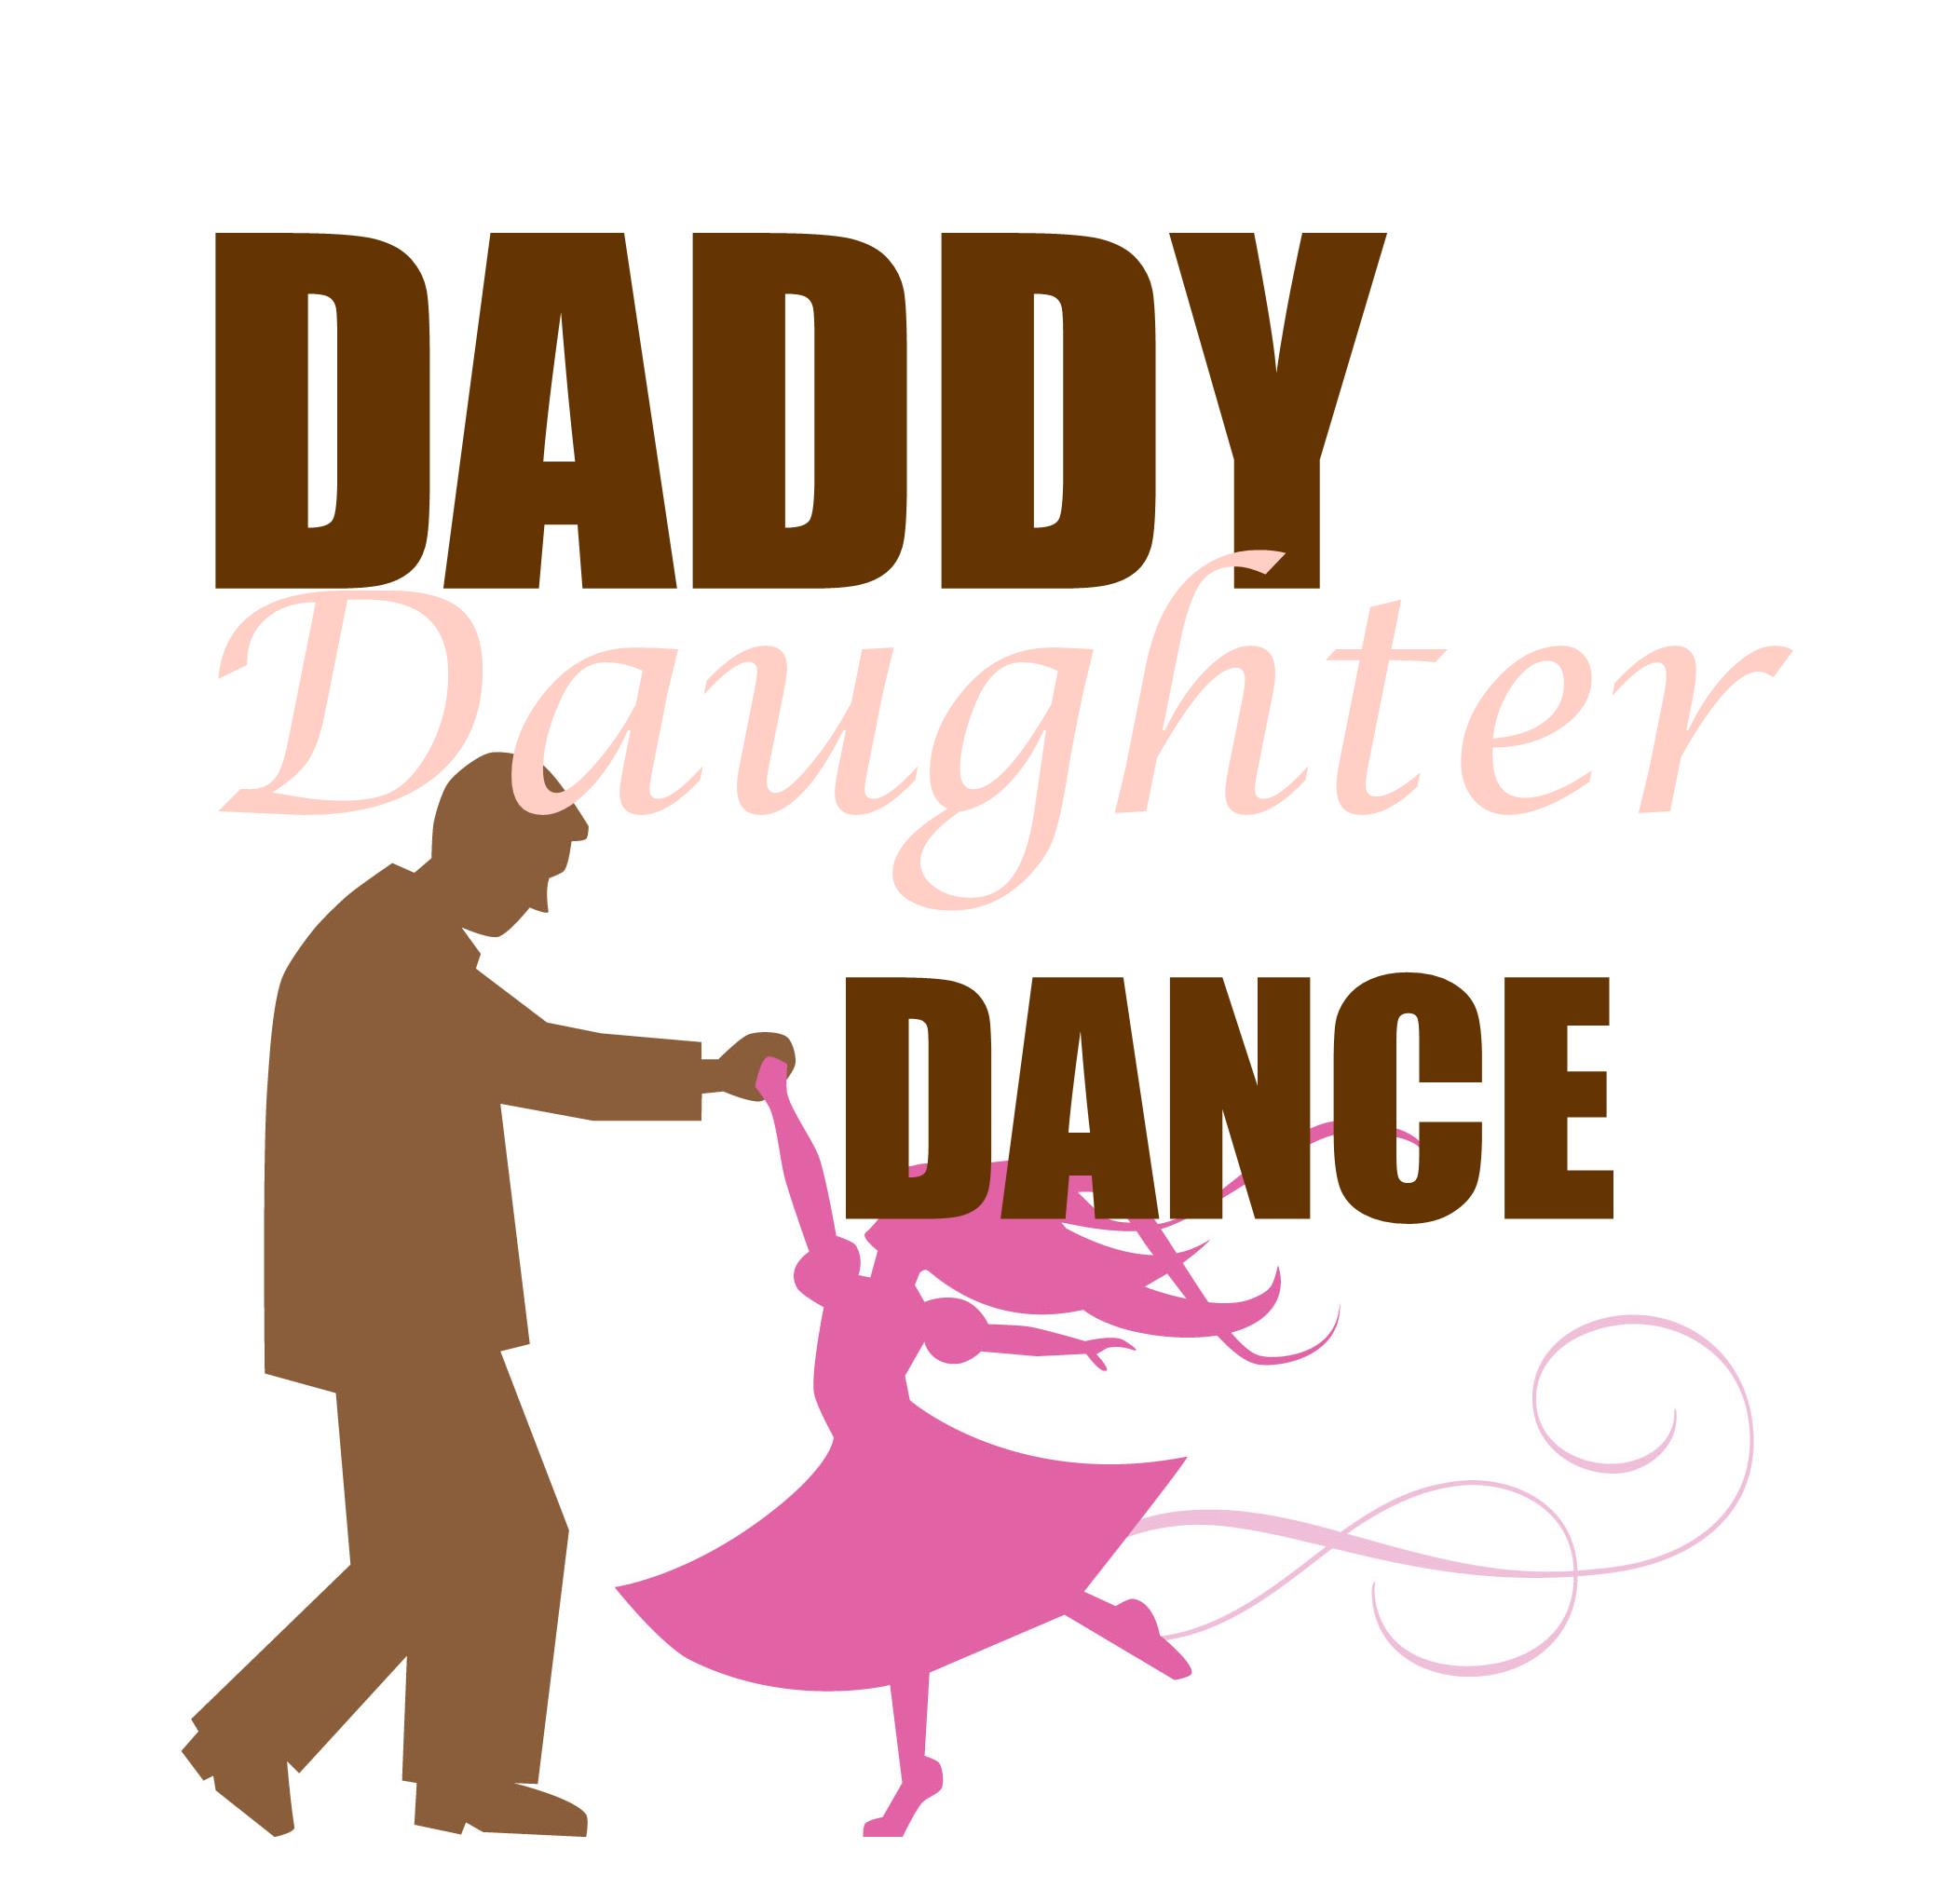 Pin Daughter. Dance Vector 16 Silhouettes